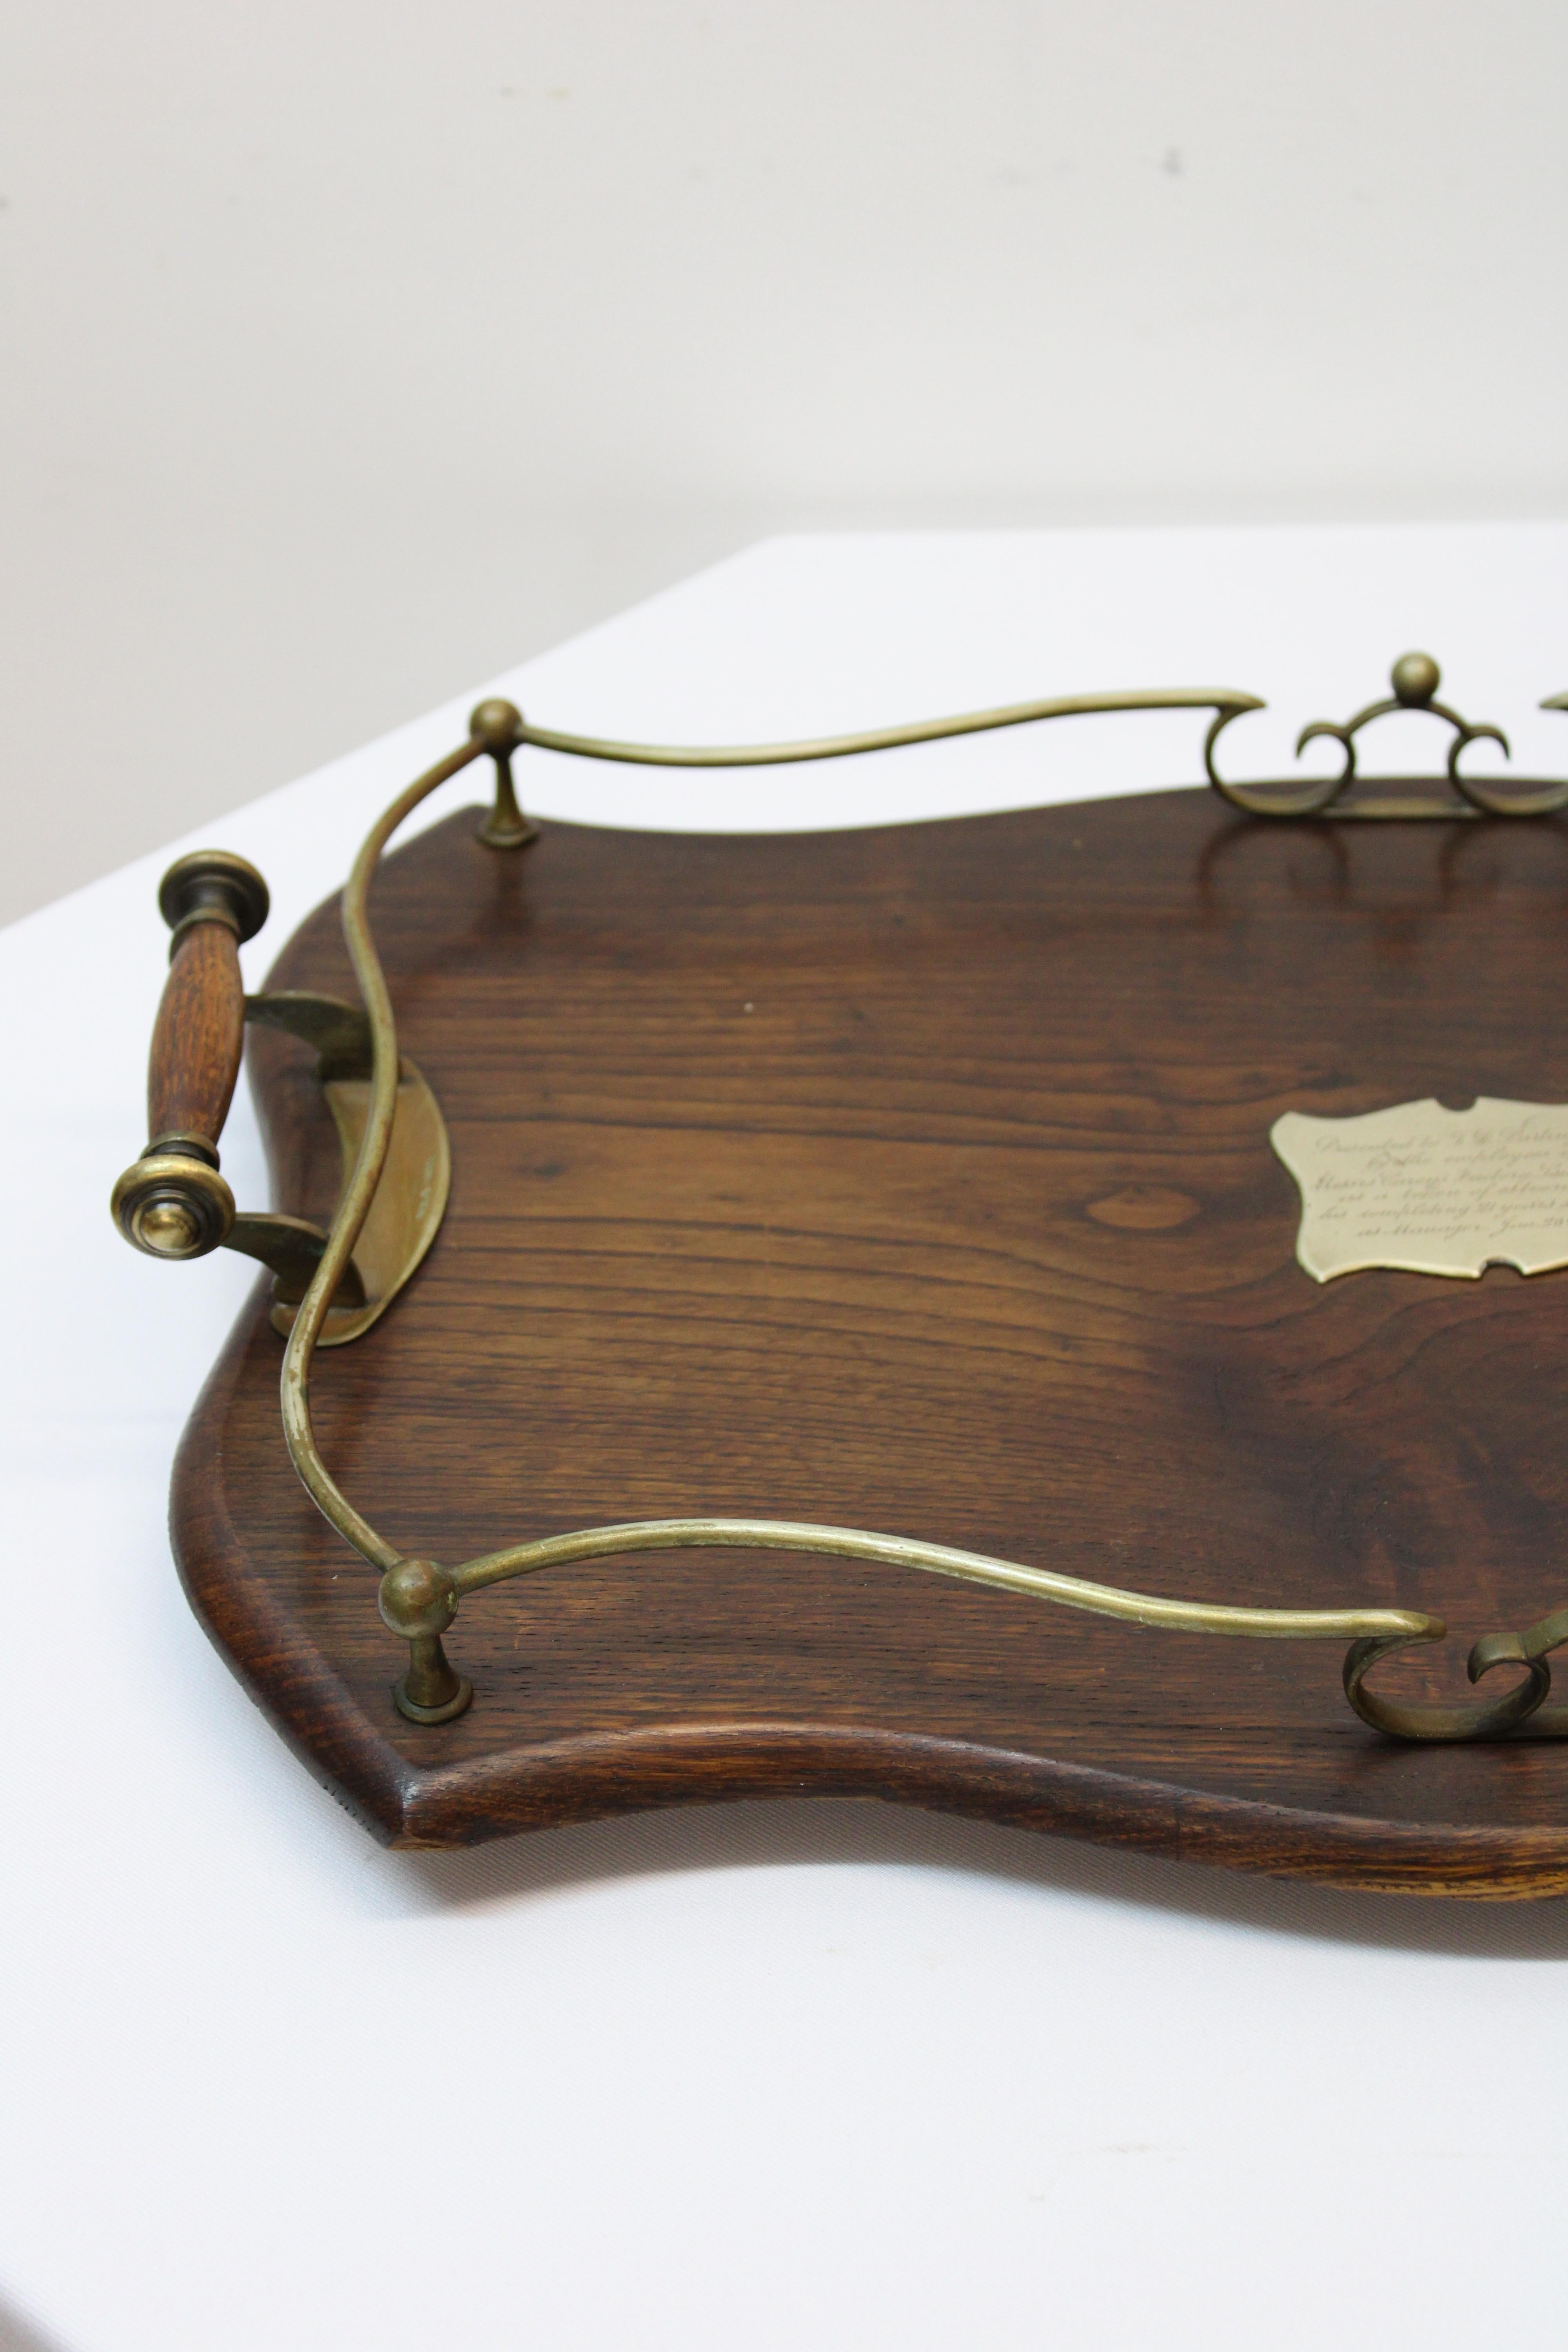 C. 20th century

English handled wood tray w/ brass accents.